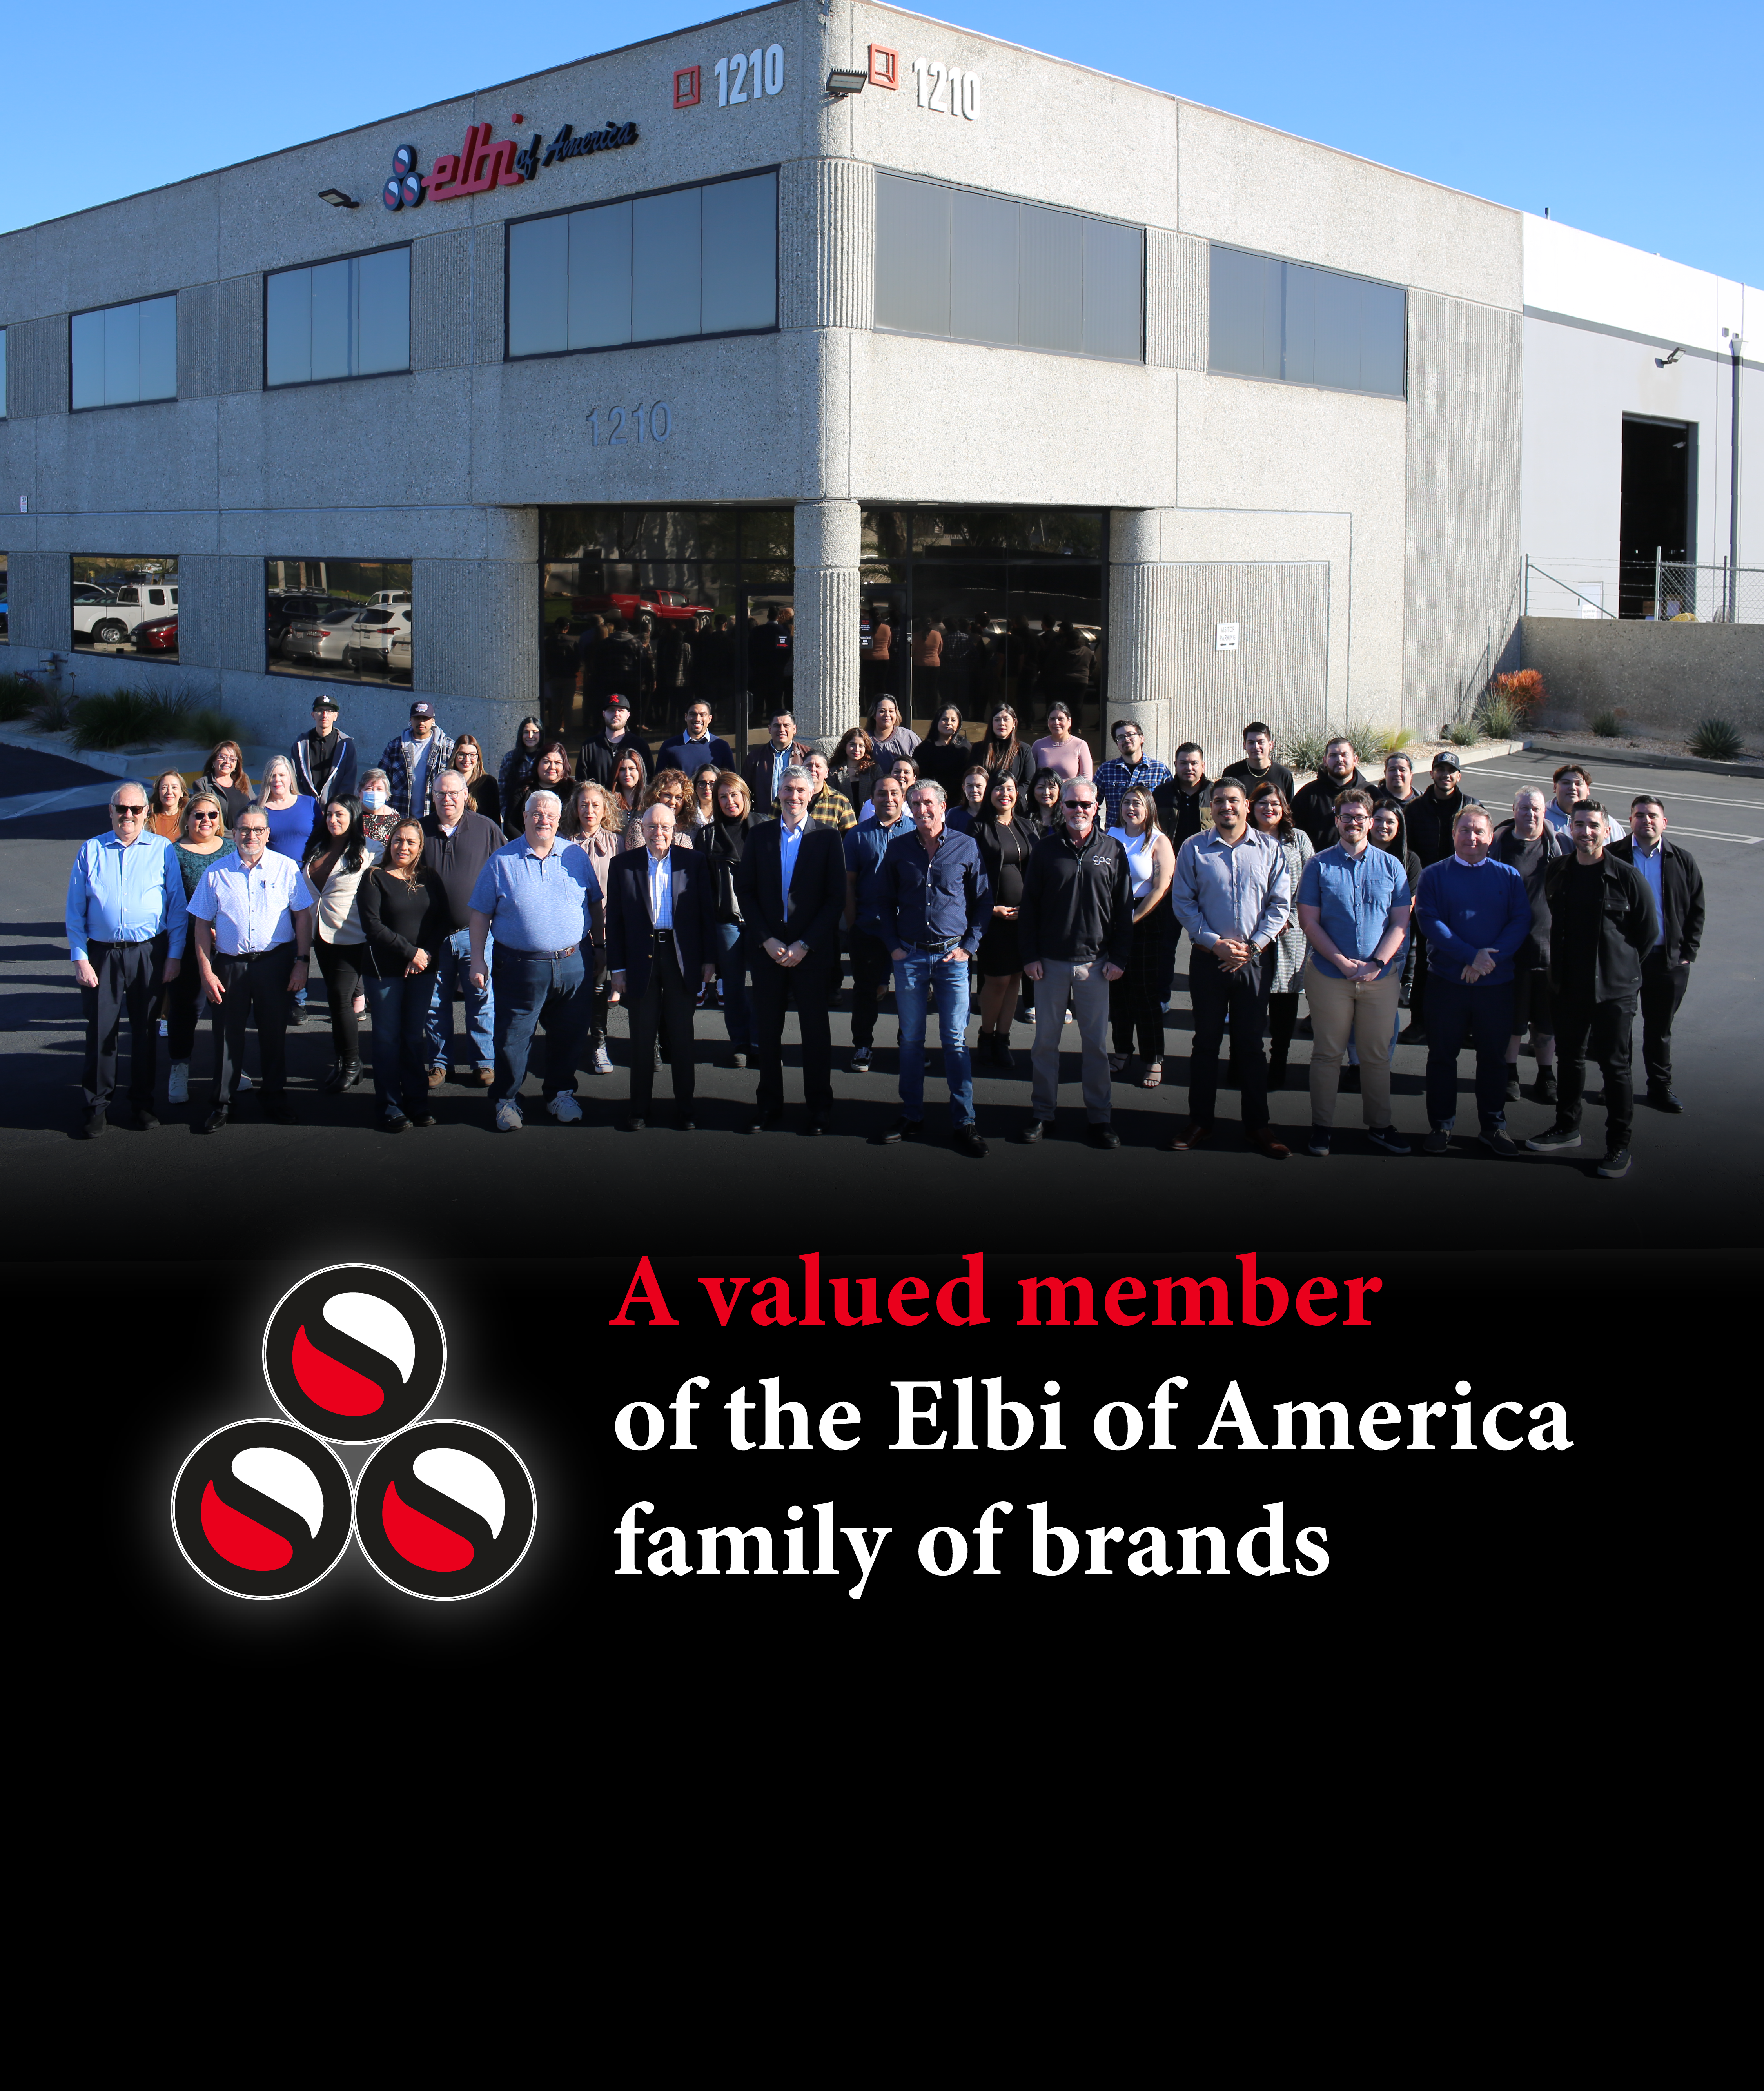 A valued member of the Elbi of America family of brands.